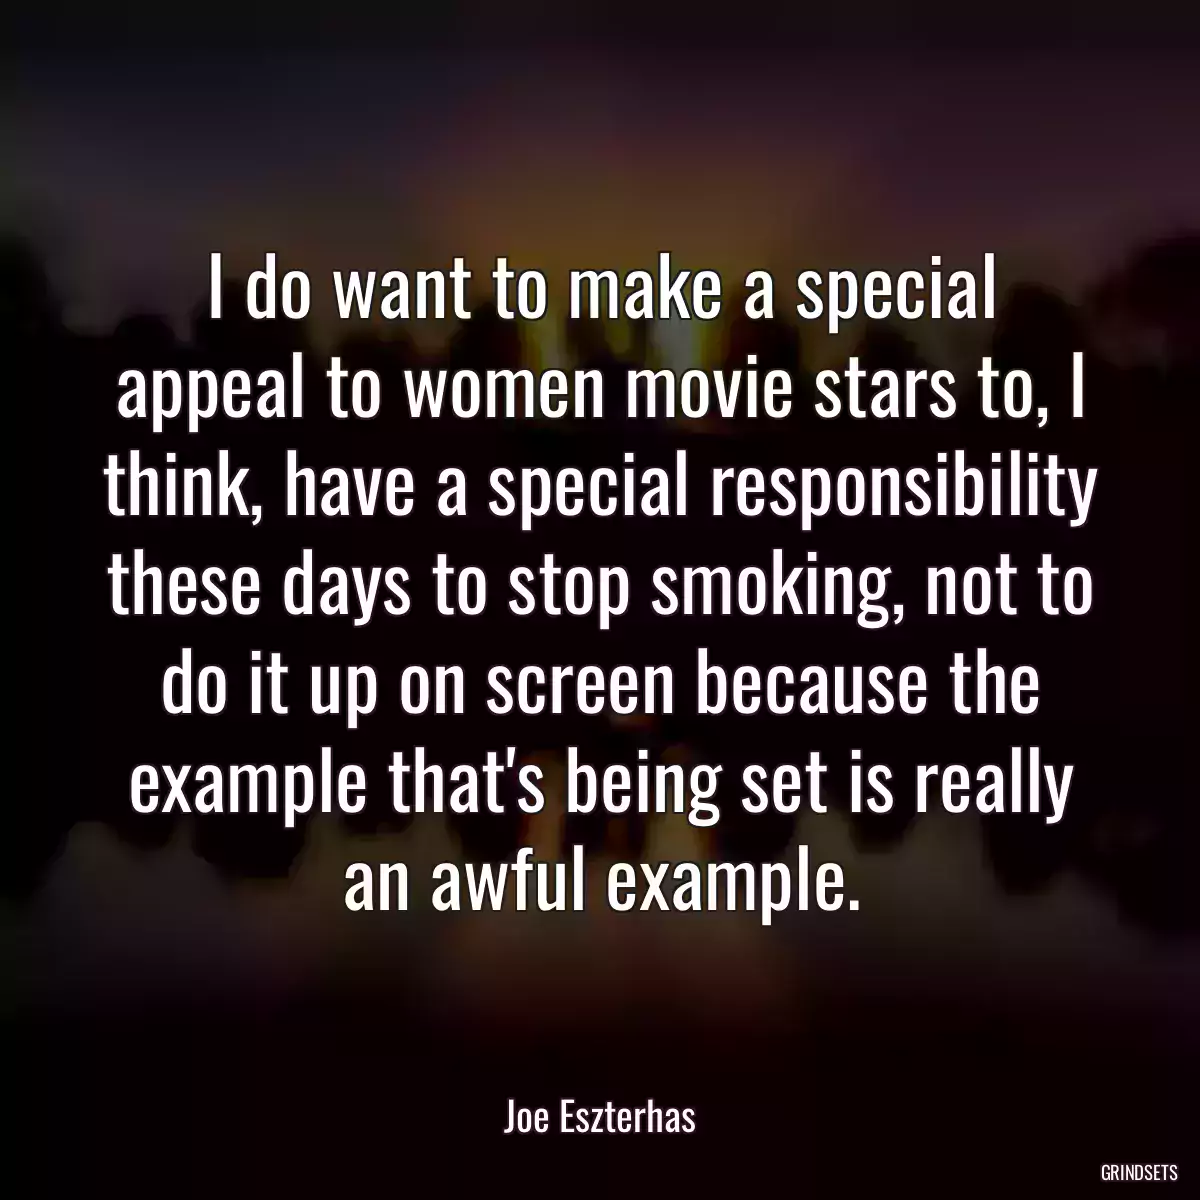 I do want to make a special appeal to women movie stars to, I think, have a special responsibility these days to stop smoking, not to do it up on screen because the example that\'s being set is really an awful example.